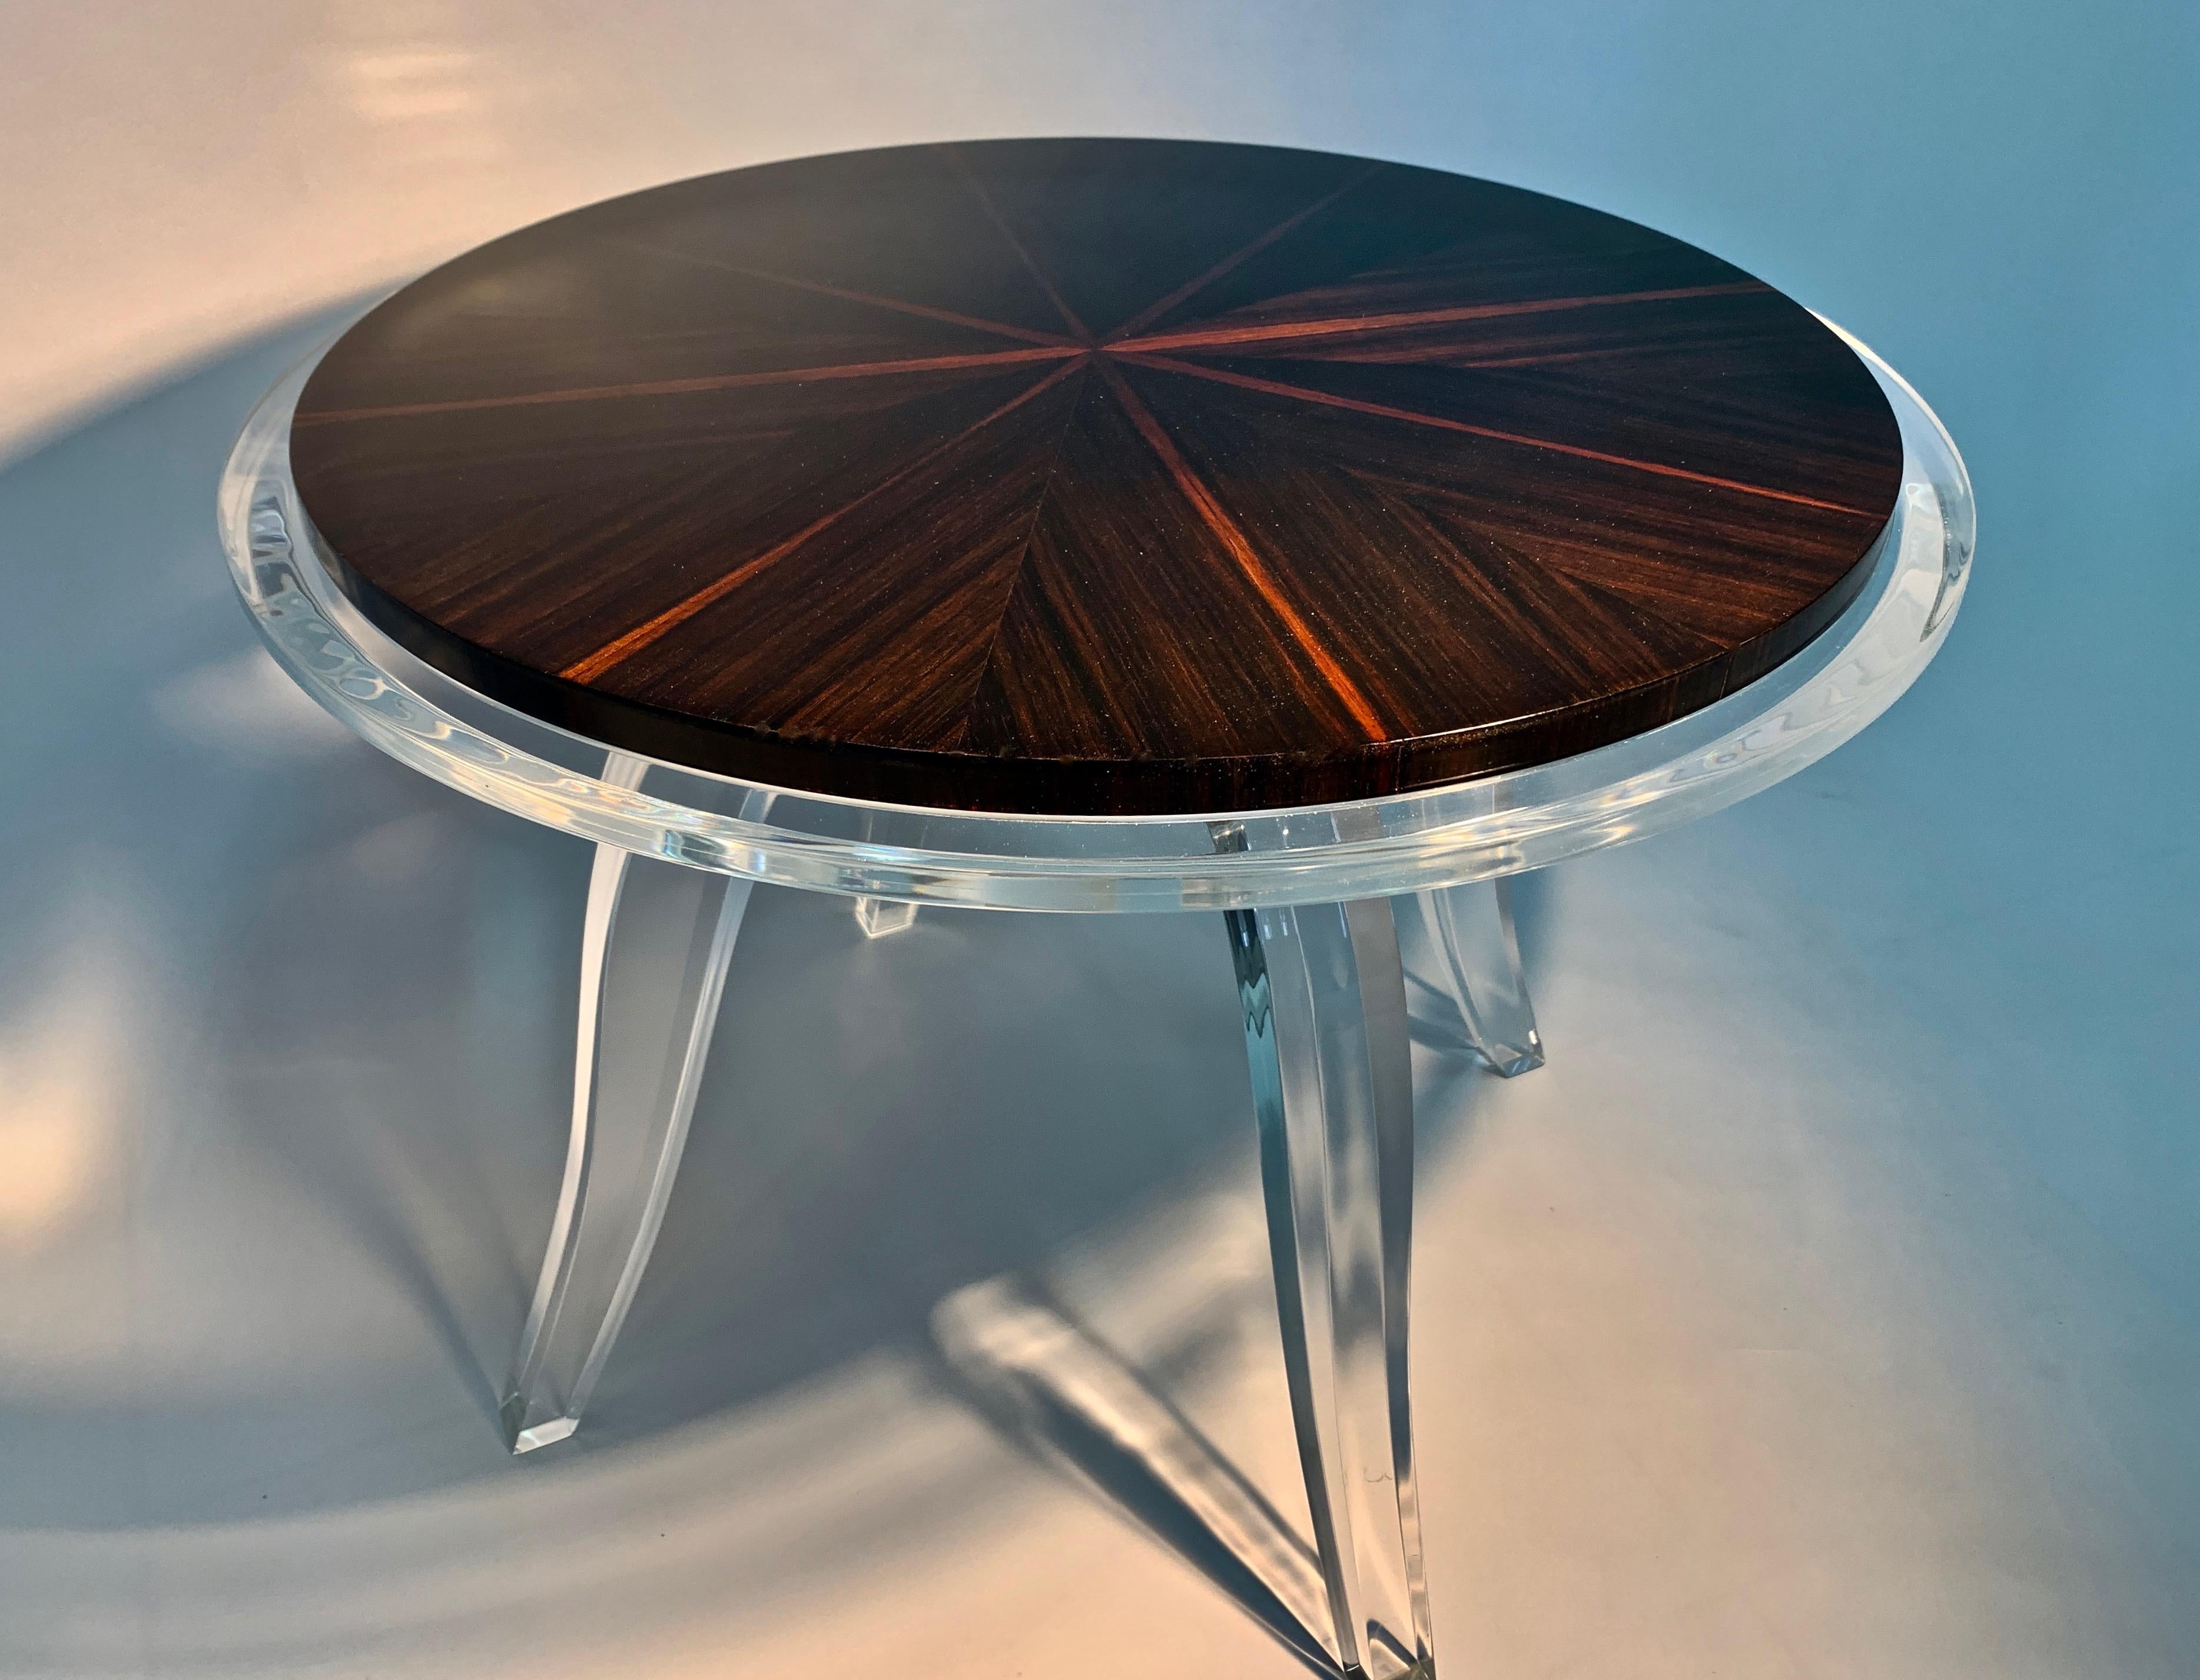 The Francesca side table by Jonathan Franc - The round natural Macassar ebony top in a sunburst veneer pattern is inset into a clear acrylic top with a 1 inch edge. All raised on a center pedestal with tapering down sweeping legs. The inset top if